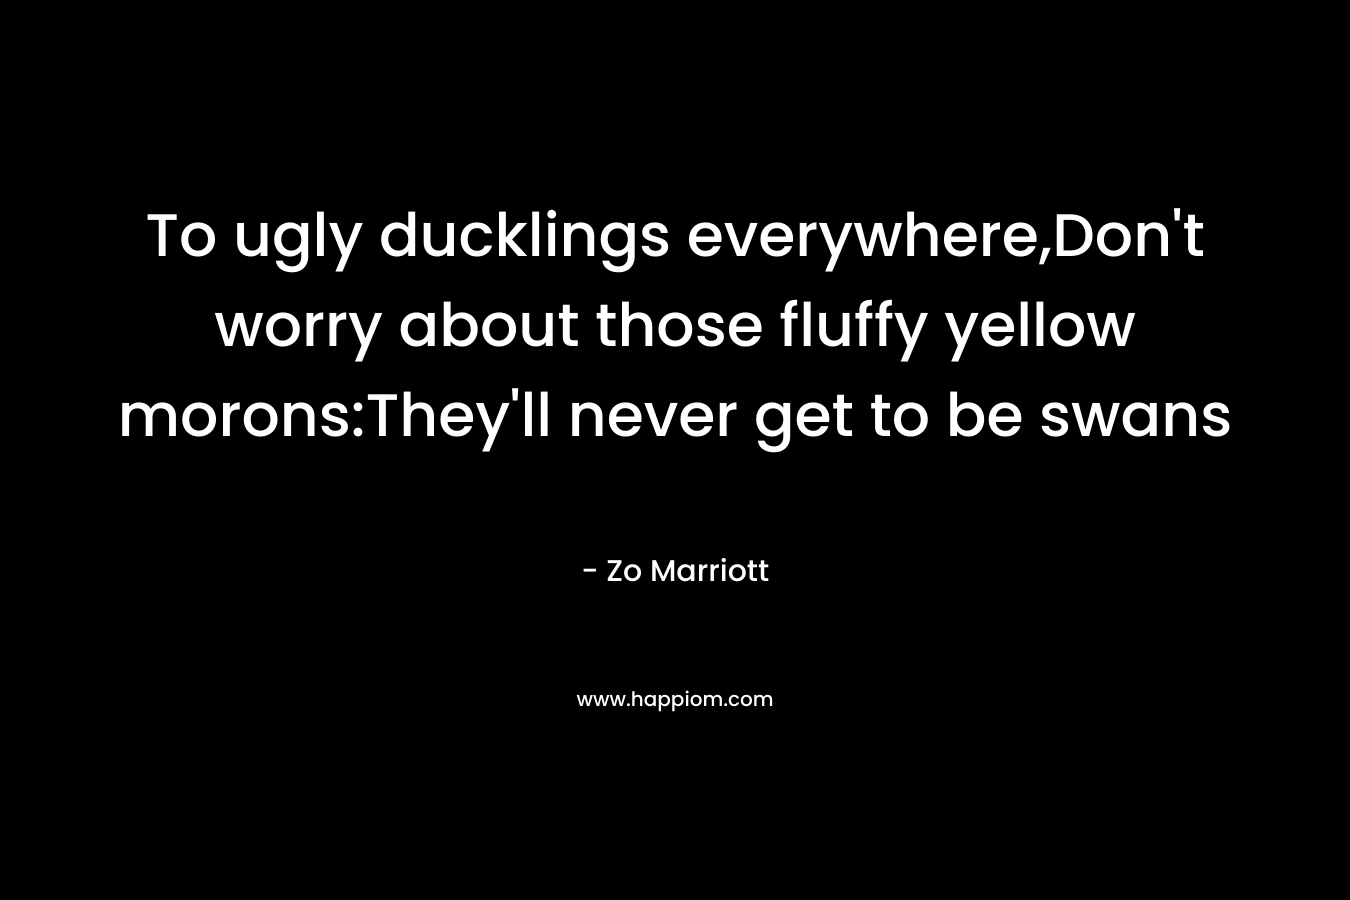 To ugly ducklings everywhere,Don’t worry about those fluffy yellow morons:They’ll never get to be swans – Zo Marriott